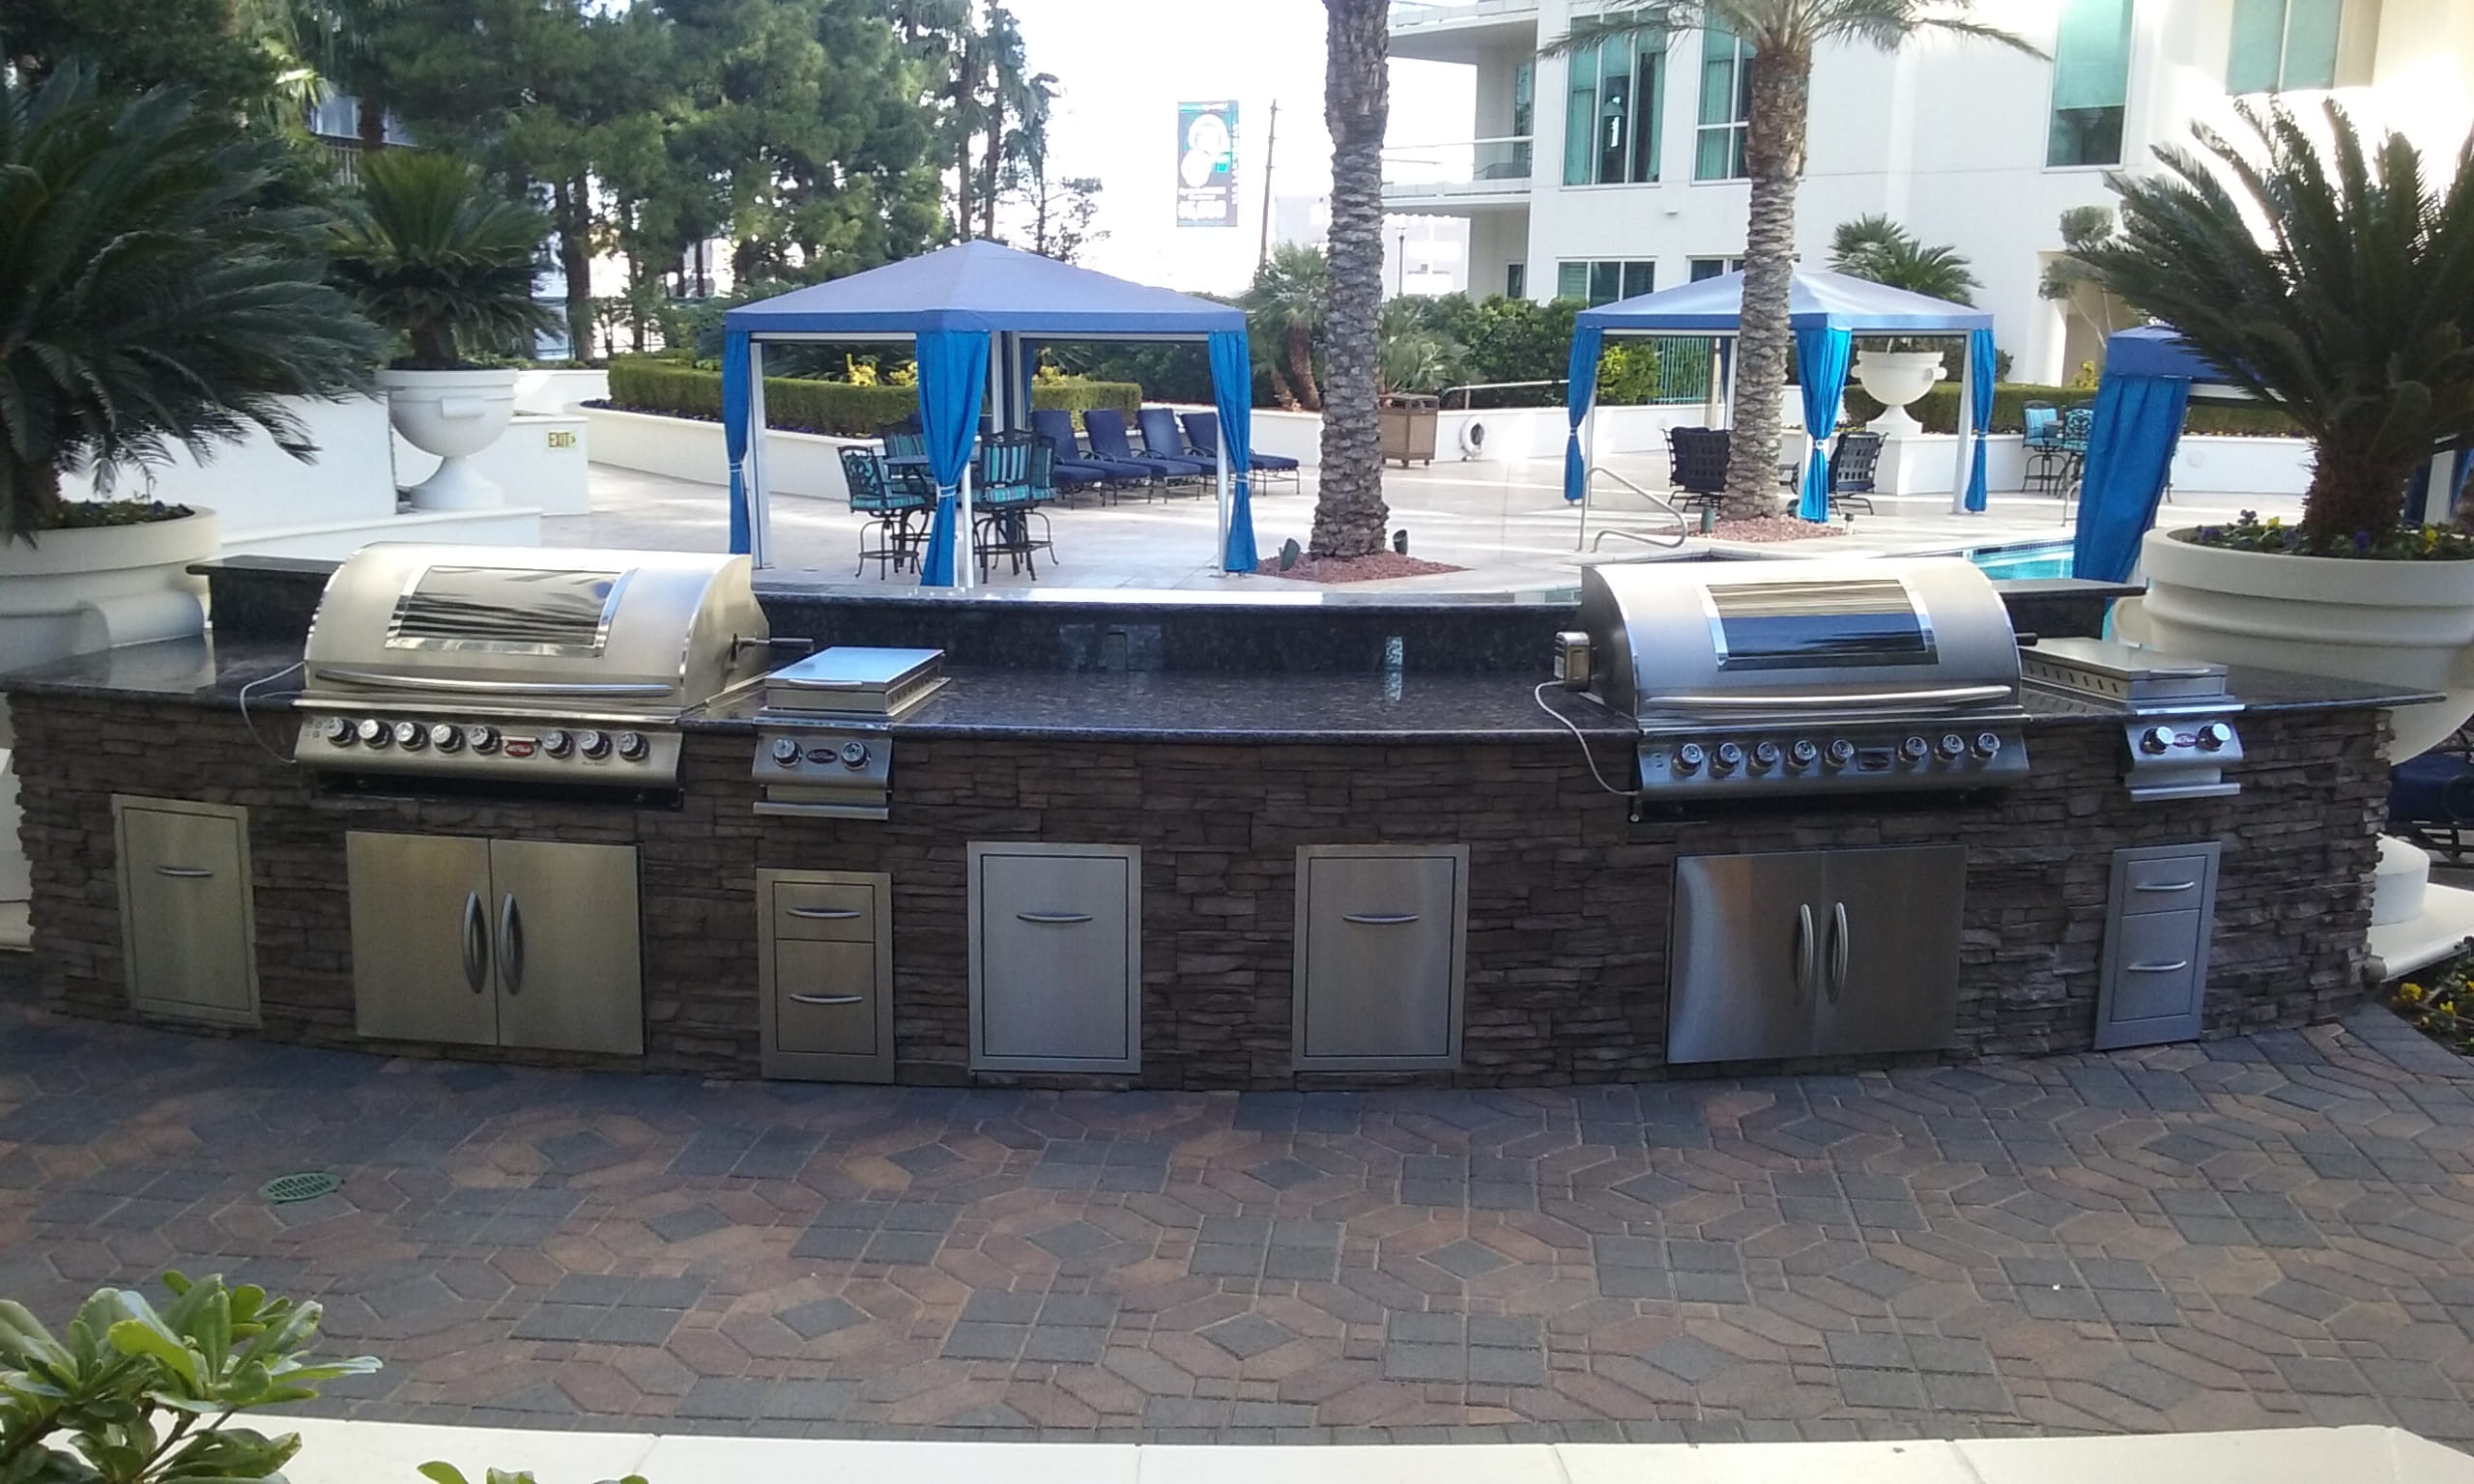 A well-equipped outdoor kitchen.